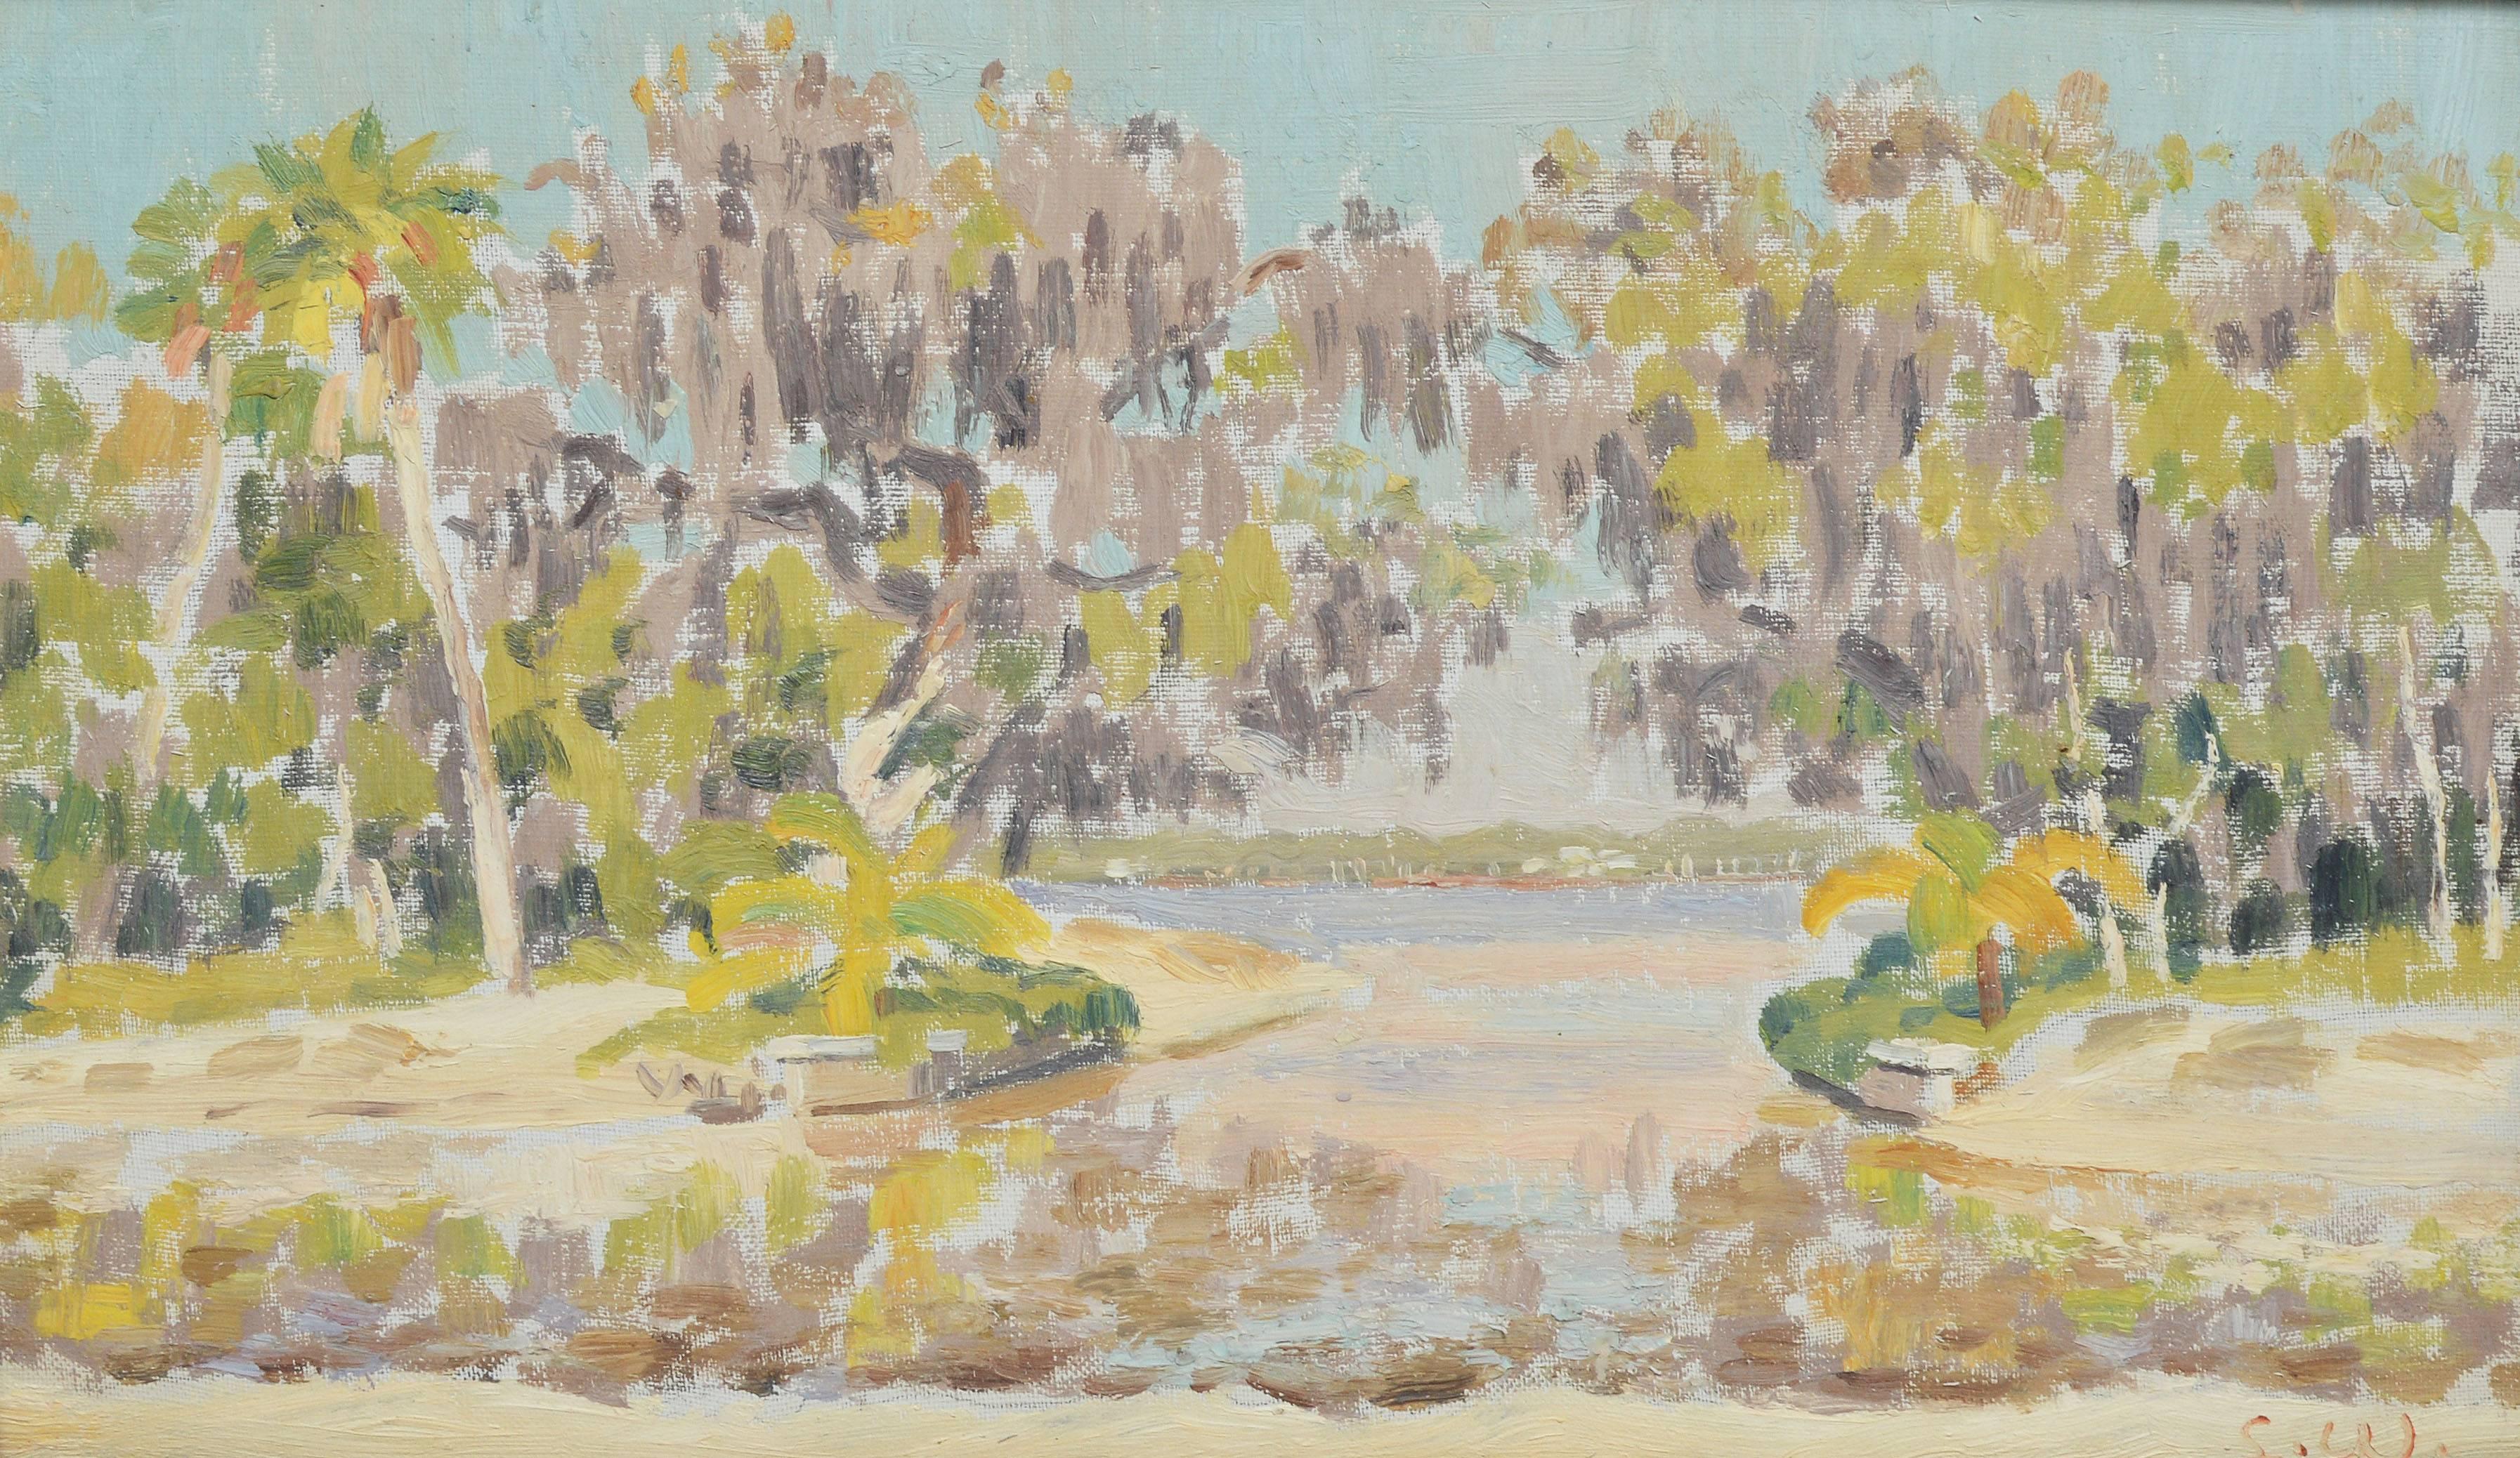 View of a Swamp by Ellsworth Woodward 2